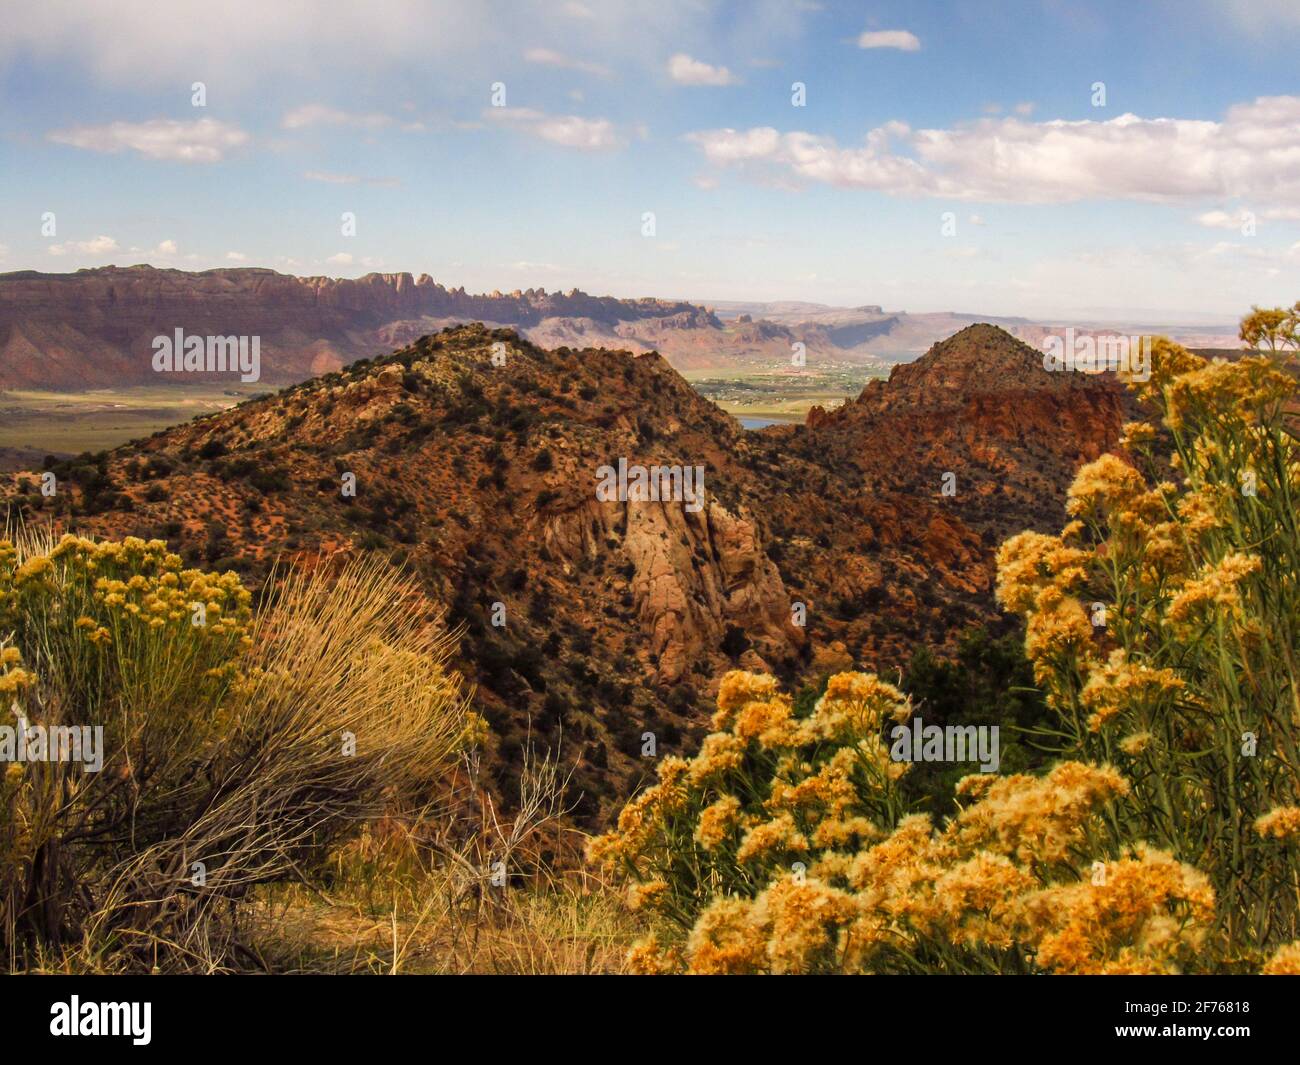 The high ridges, surrounding the town of Moab, in Utah, USA, as seen from the La Sal Mountains, with Rabbit bush in the foreground Stock Photo